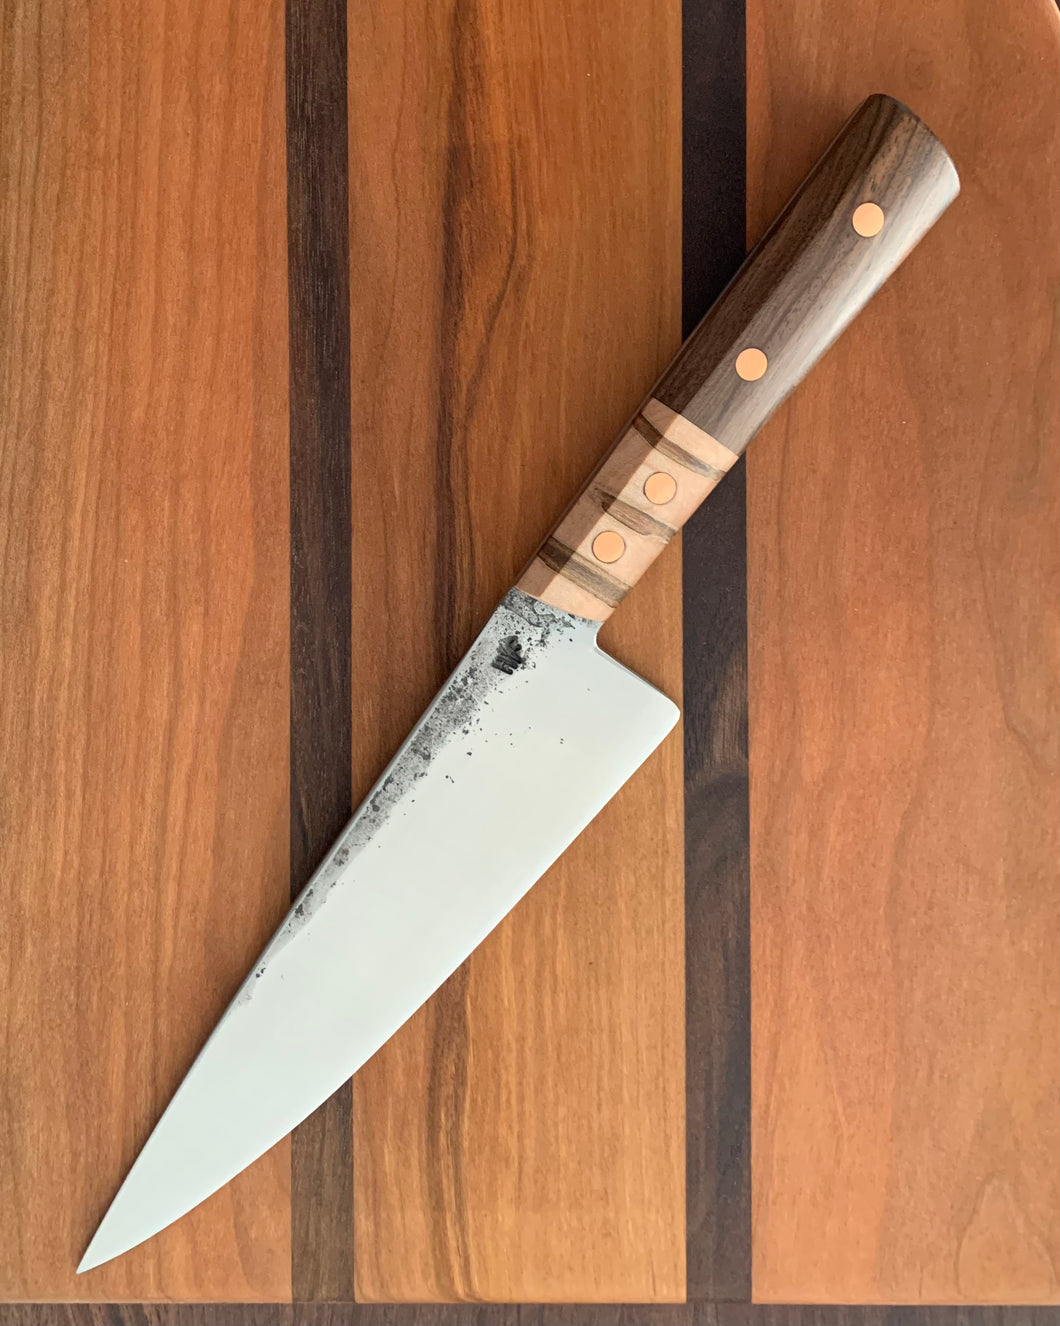 Heartwood forge 6.7” 52100 chef’s